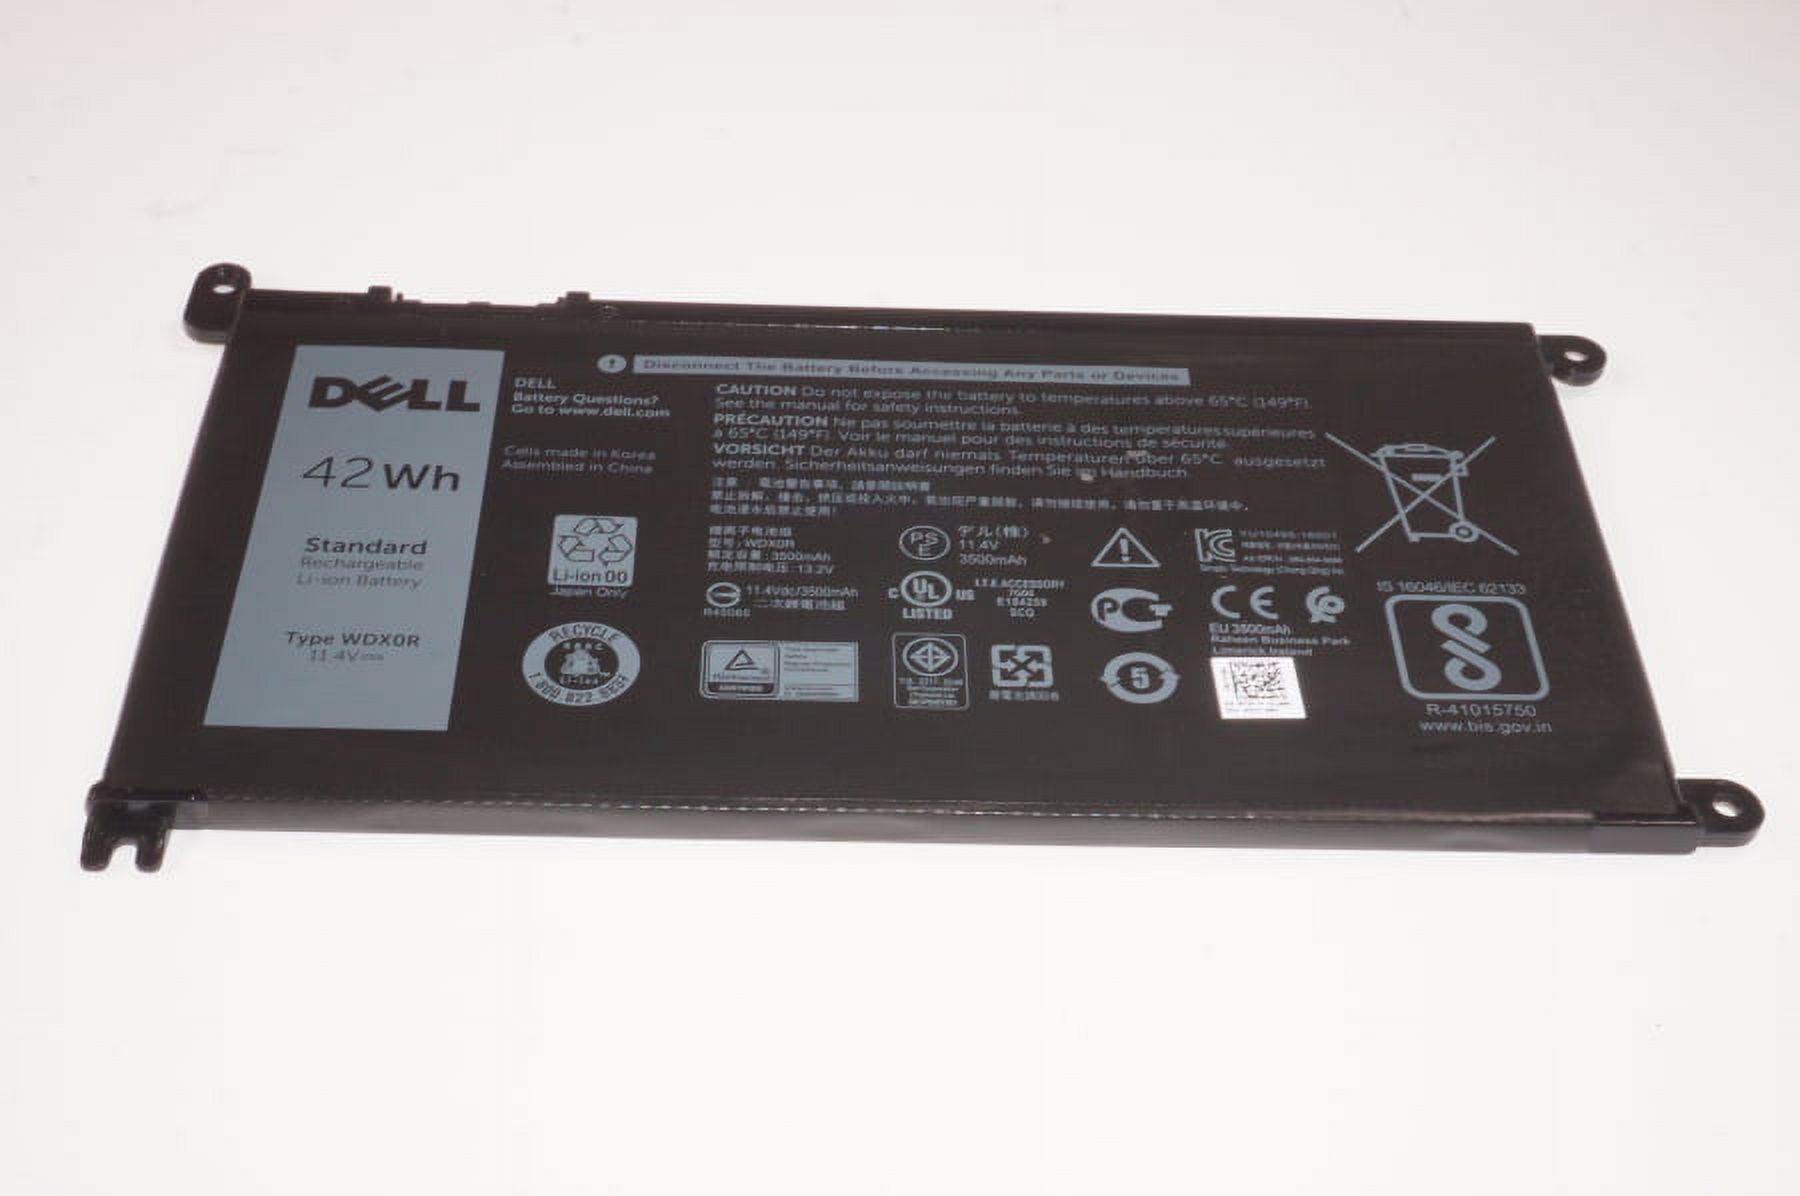 V3F7V Dell 42wh 11.4v 3500mah Battery I7573-5104GRY-PUS I7378-0028GRY - image 1 of 1